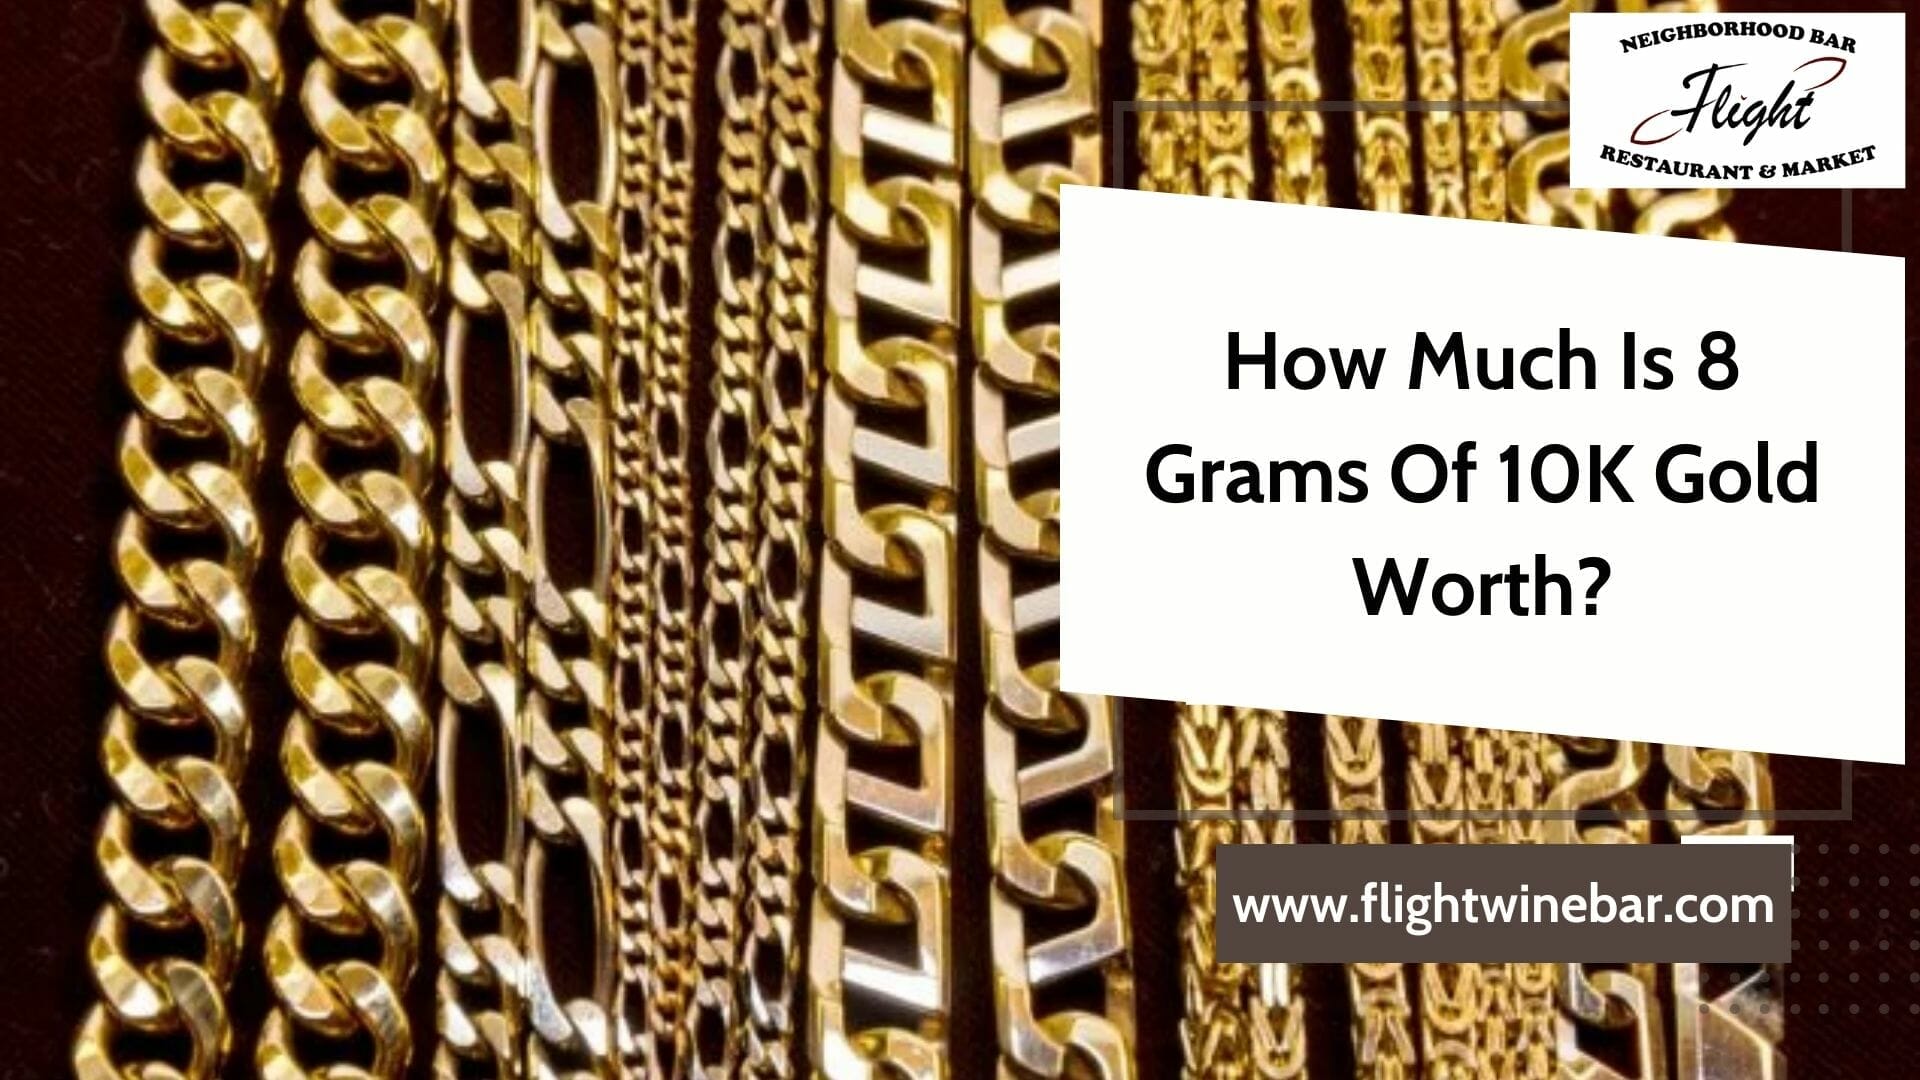 ﻿How Much Is 8 Grams Of 10K Gold Worth